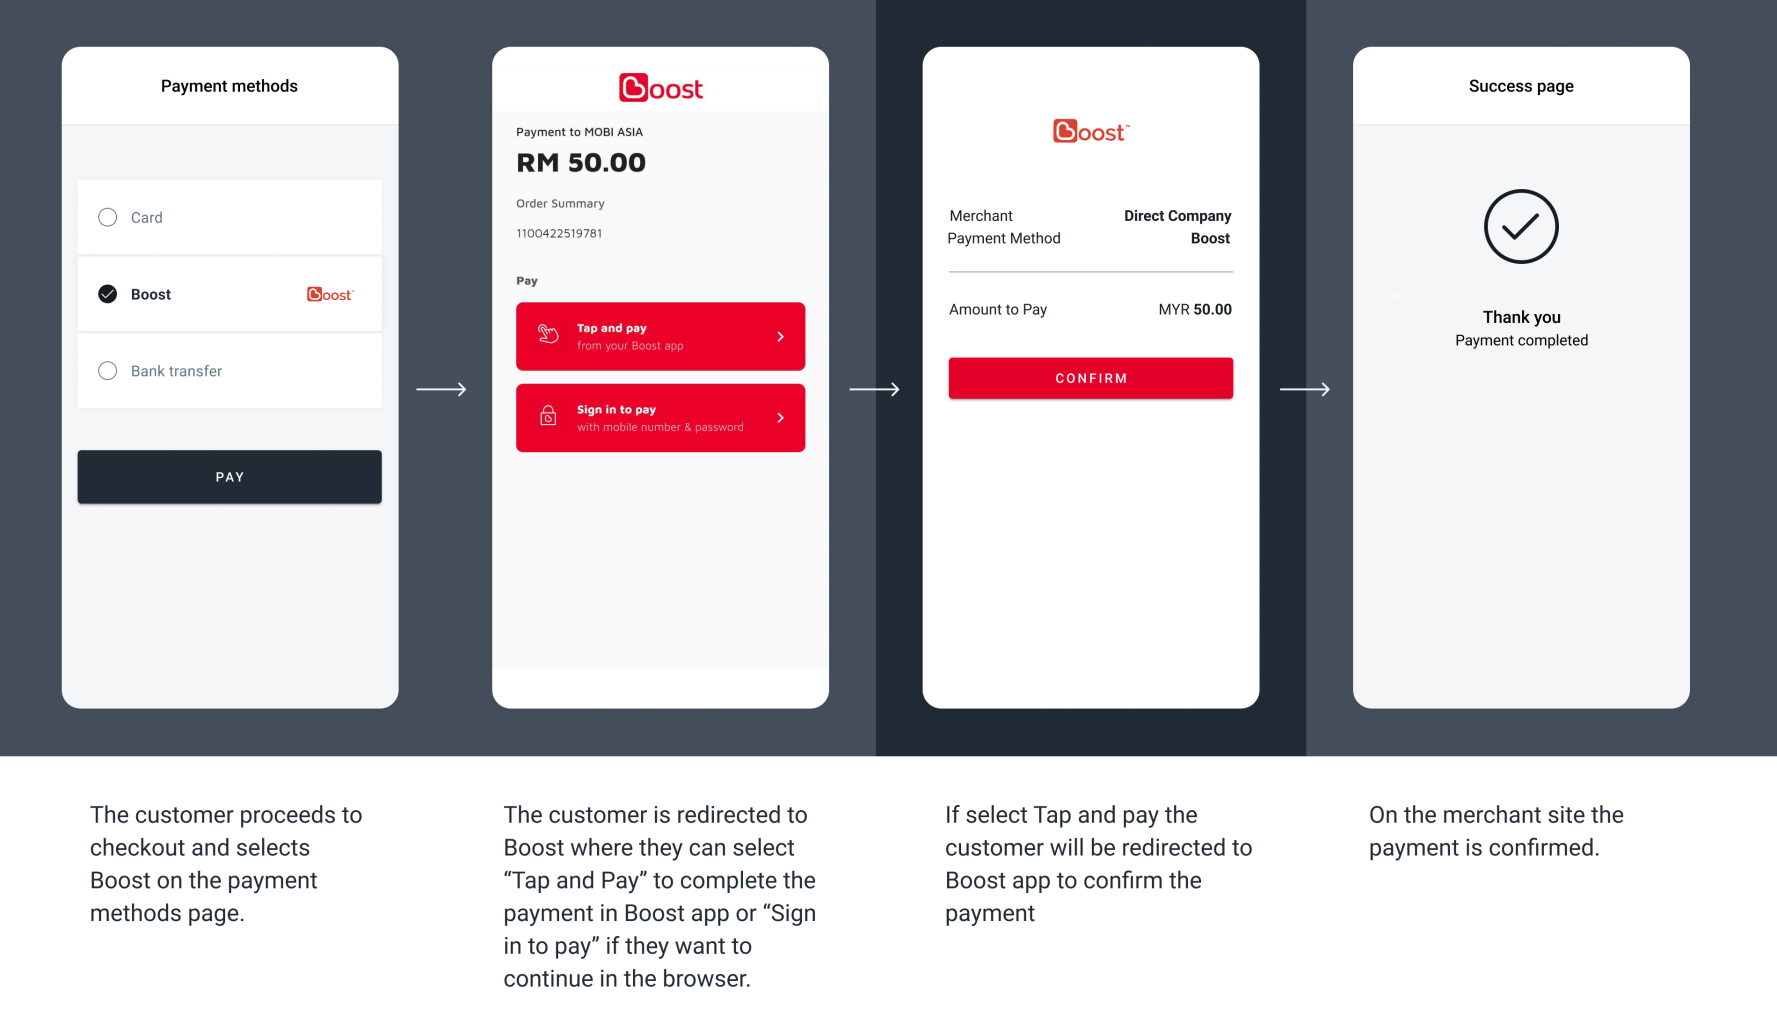 The screenshots illustrate a generic Boost redirect flow on mobile choosing the Tap and Pay option to complete the payment in-app.